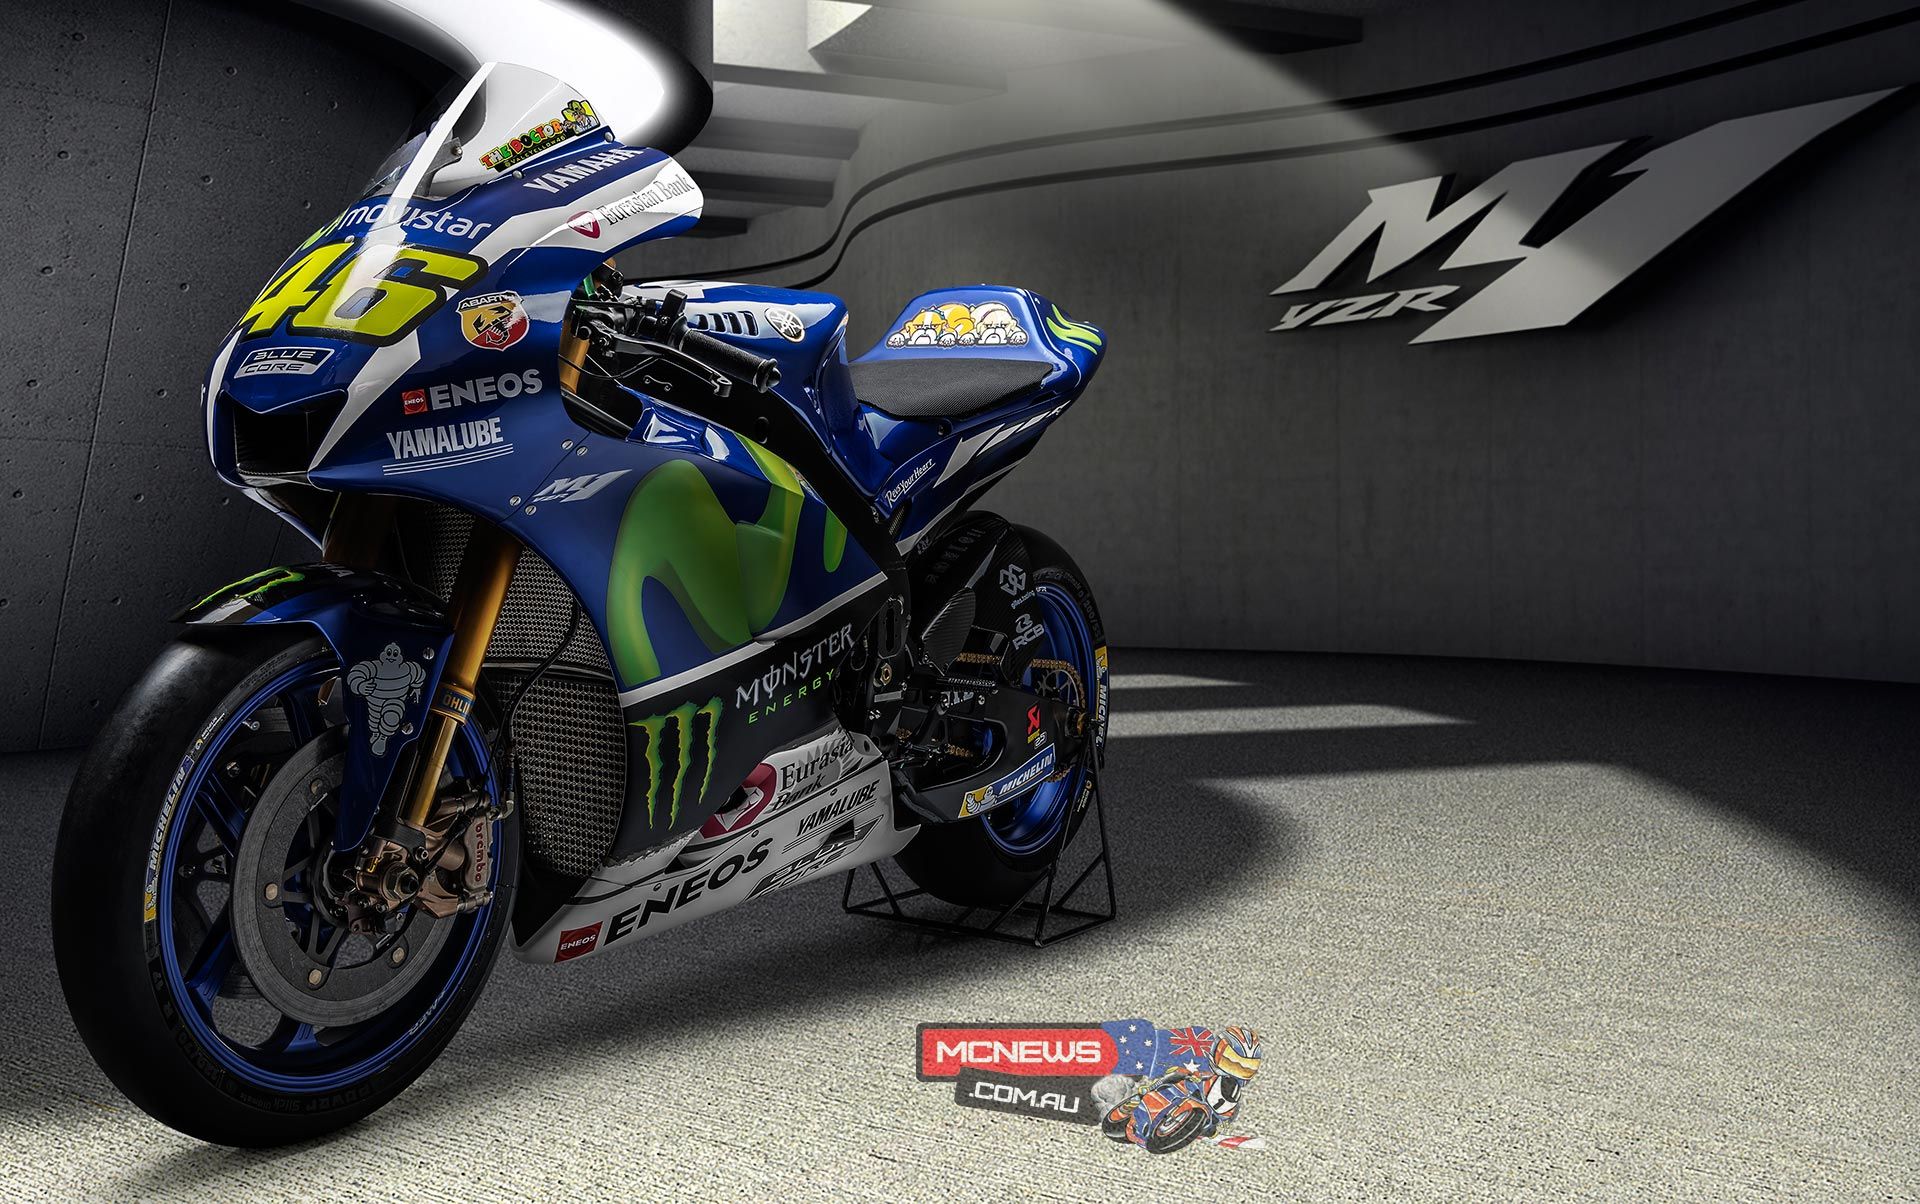 Free Download Valentino Rossi 2016 MotoGP Livery MCNewscomau [1920x1204] For Your Desktop, Mobile & Tablet. Explore 2019 Yamaha YZR M1 Wallpaper Yamaha YZR M1 Wallpaper, Yamaha R1 2019 Wallpaper, Petronas Yamaha SRT 2019 Wallpaper